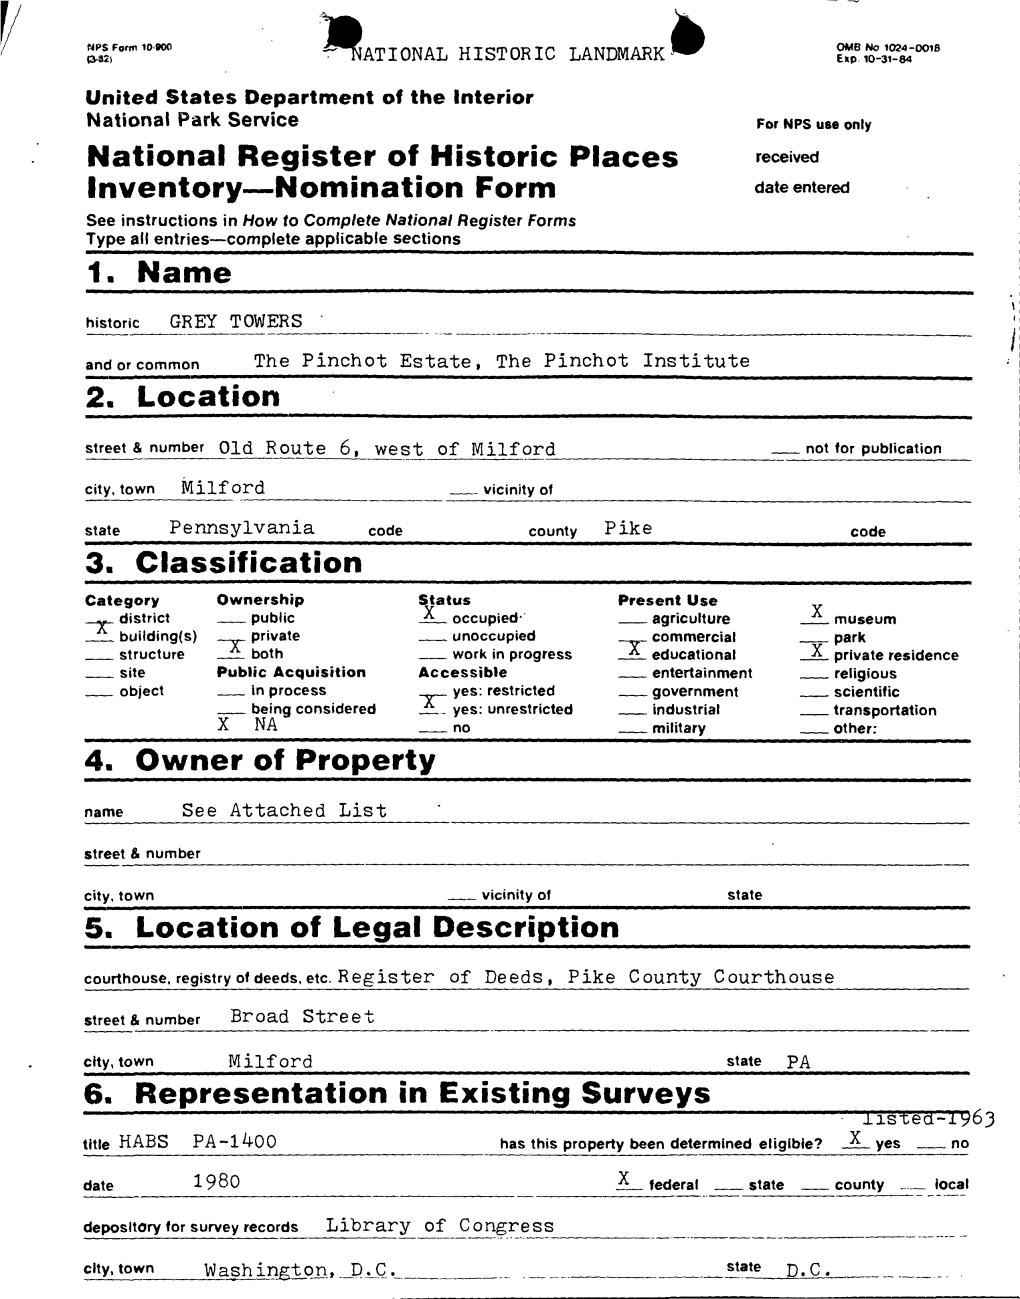 National Register of Historic Places Inventory—Nomination Form: Grey Towers